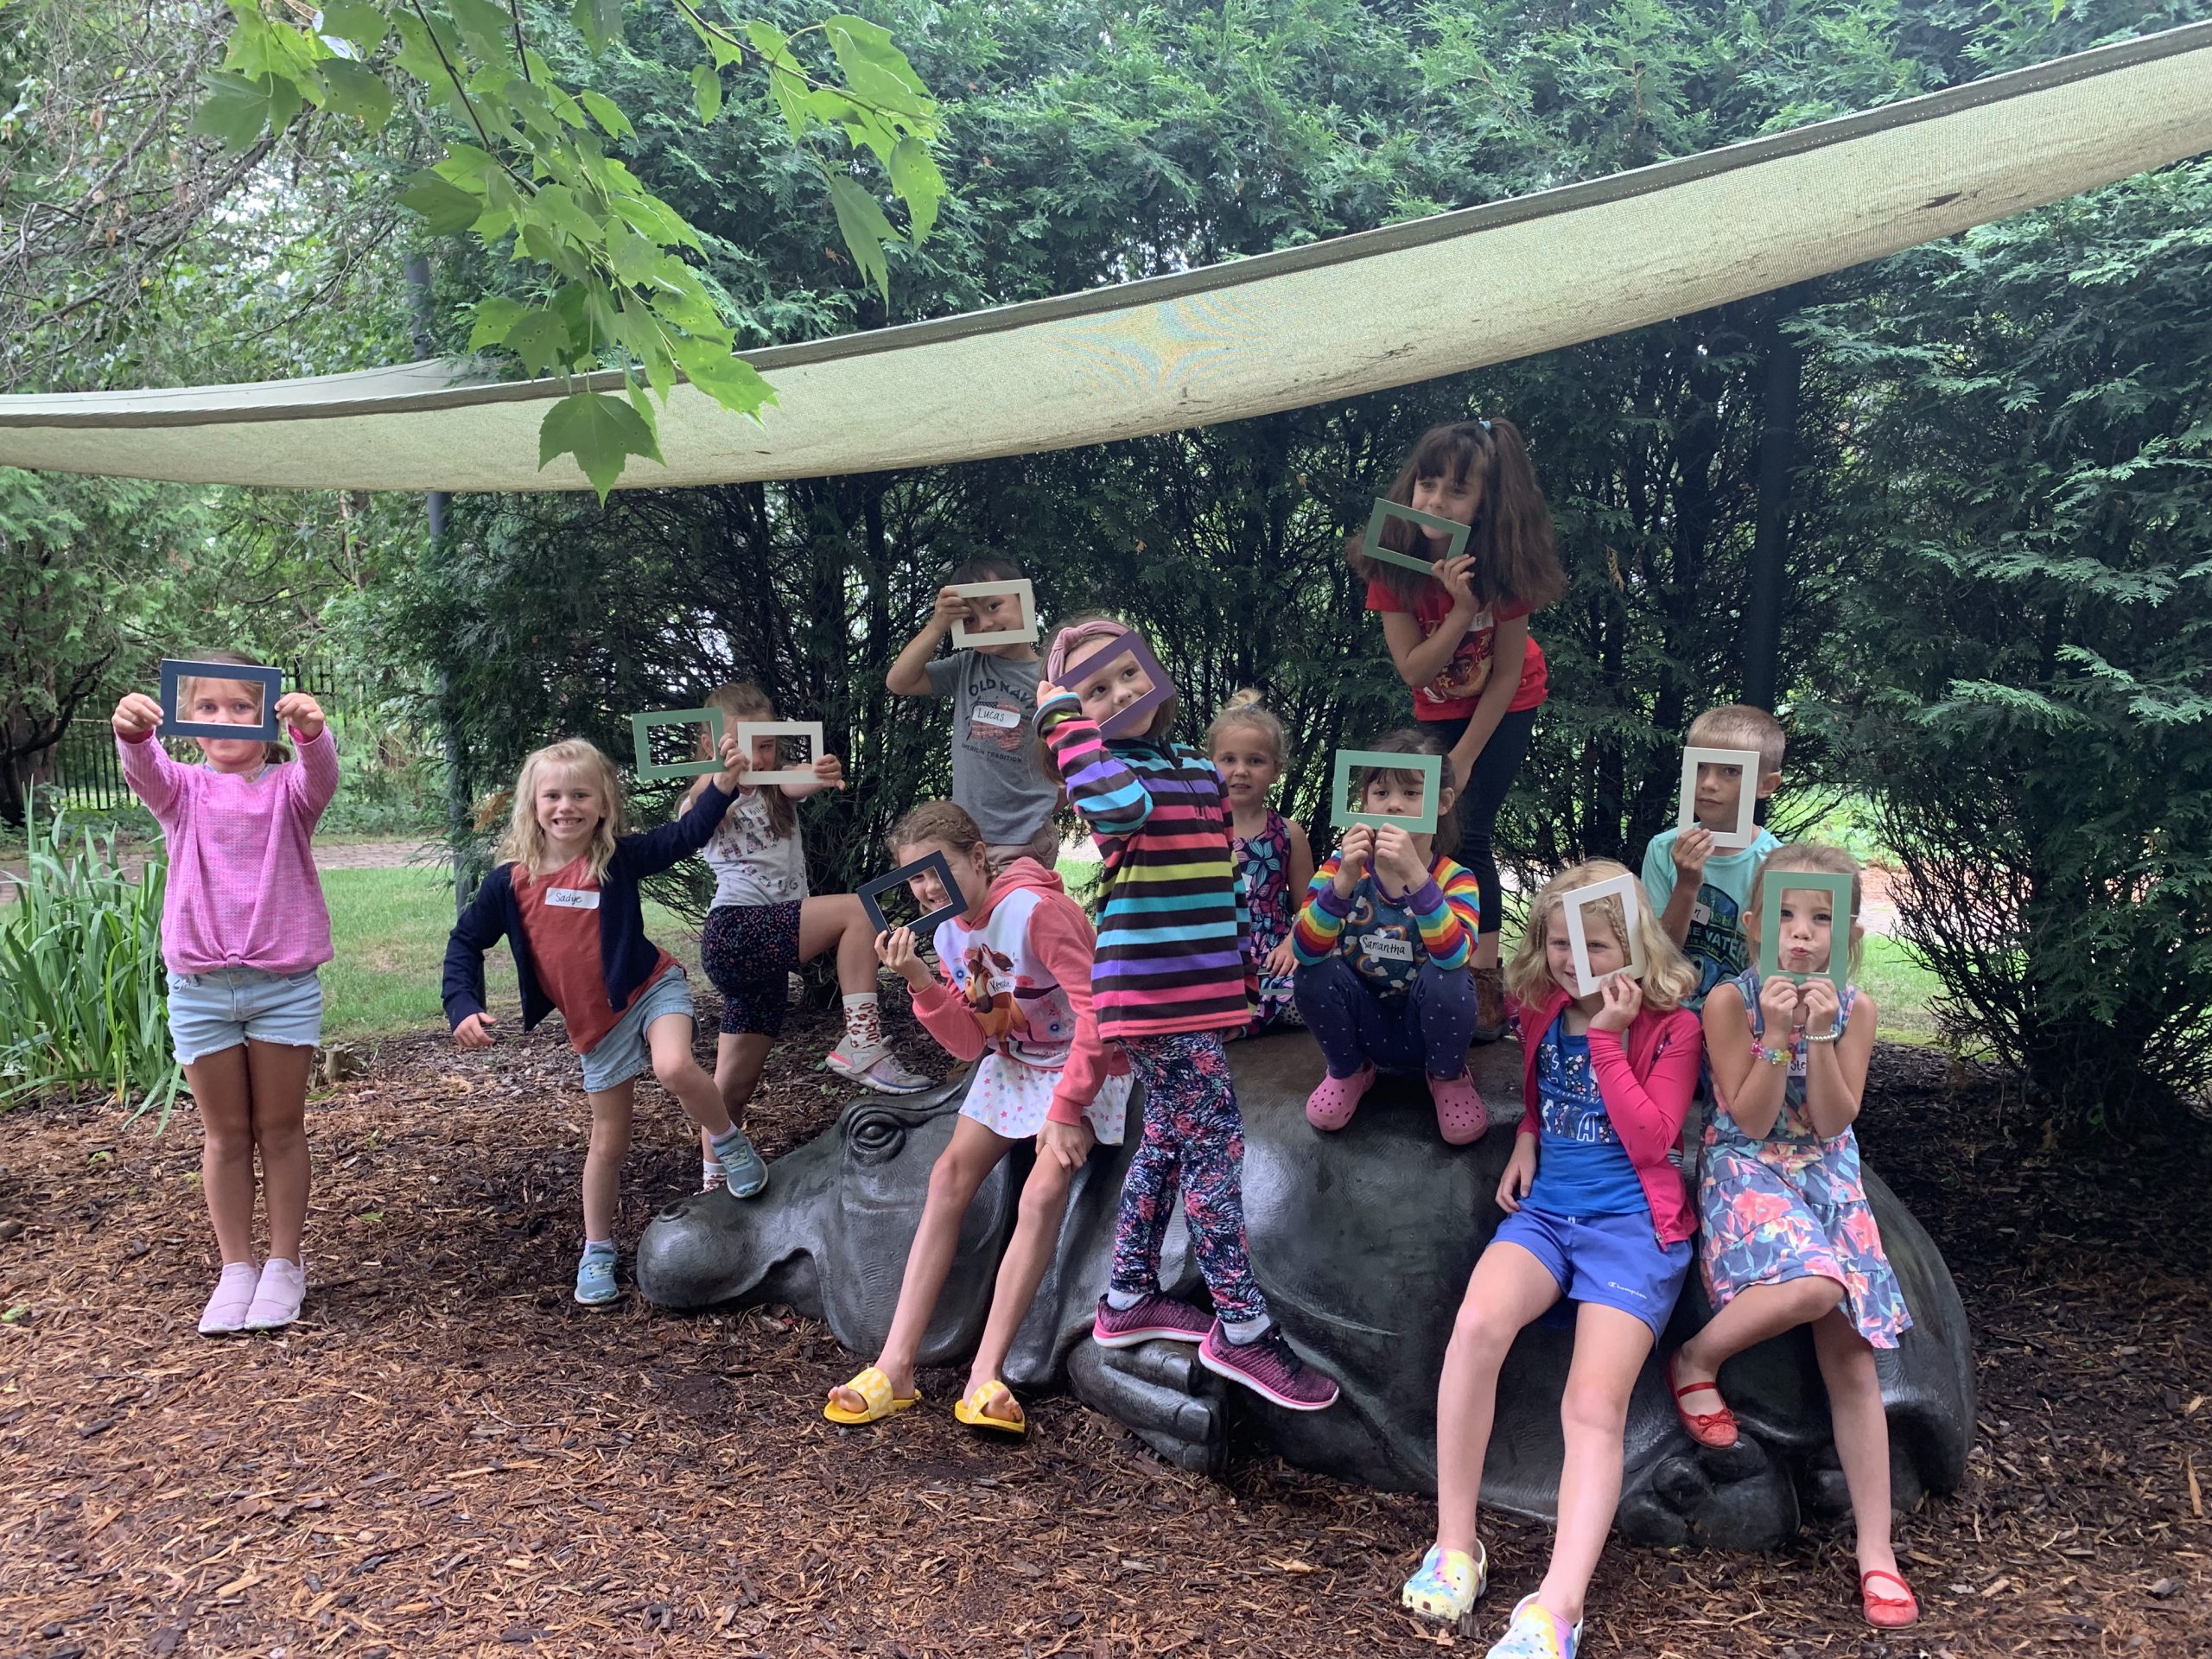 Younger Summer Art Session participants smile and pose behind mat board "view finders" for a group photo, posed around and sitting on top of a bronze hippo sculpture in the garden.